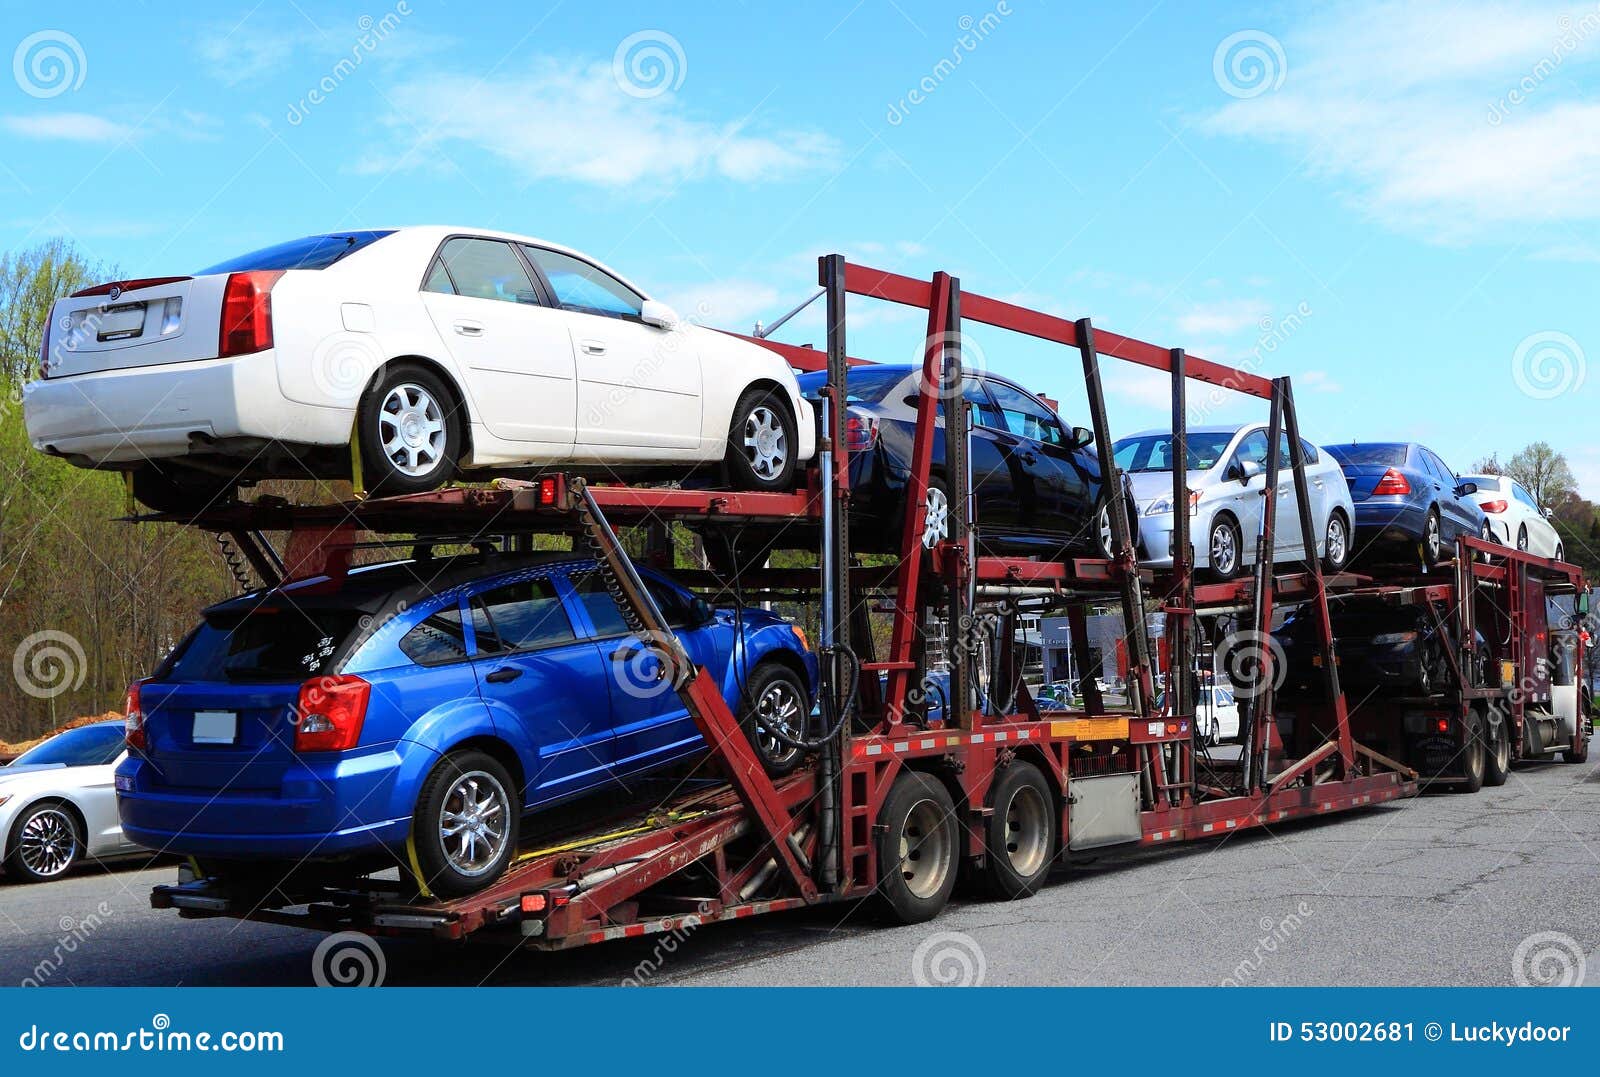 Auto Transporter Carries New Cars Of Blue, Red Colors From, 60% OFF